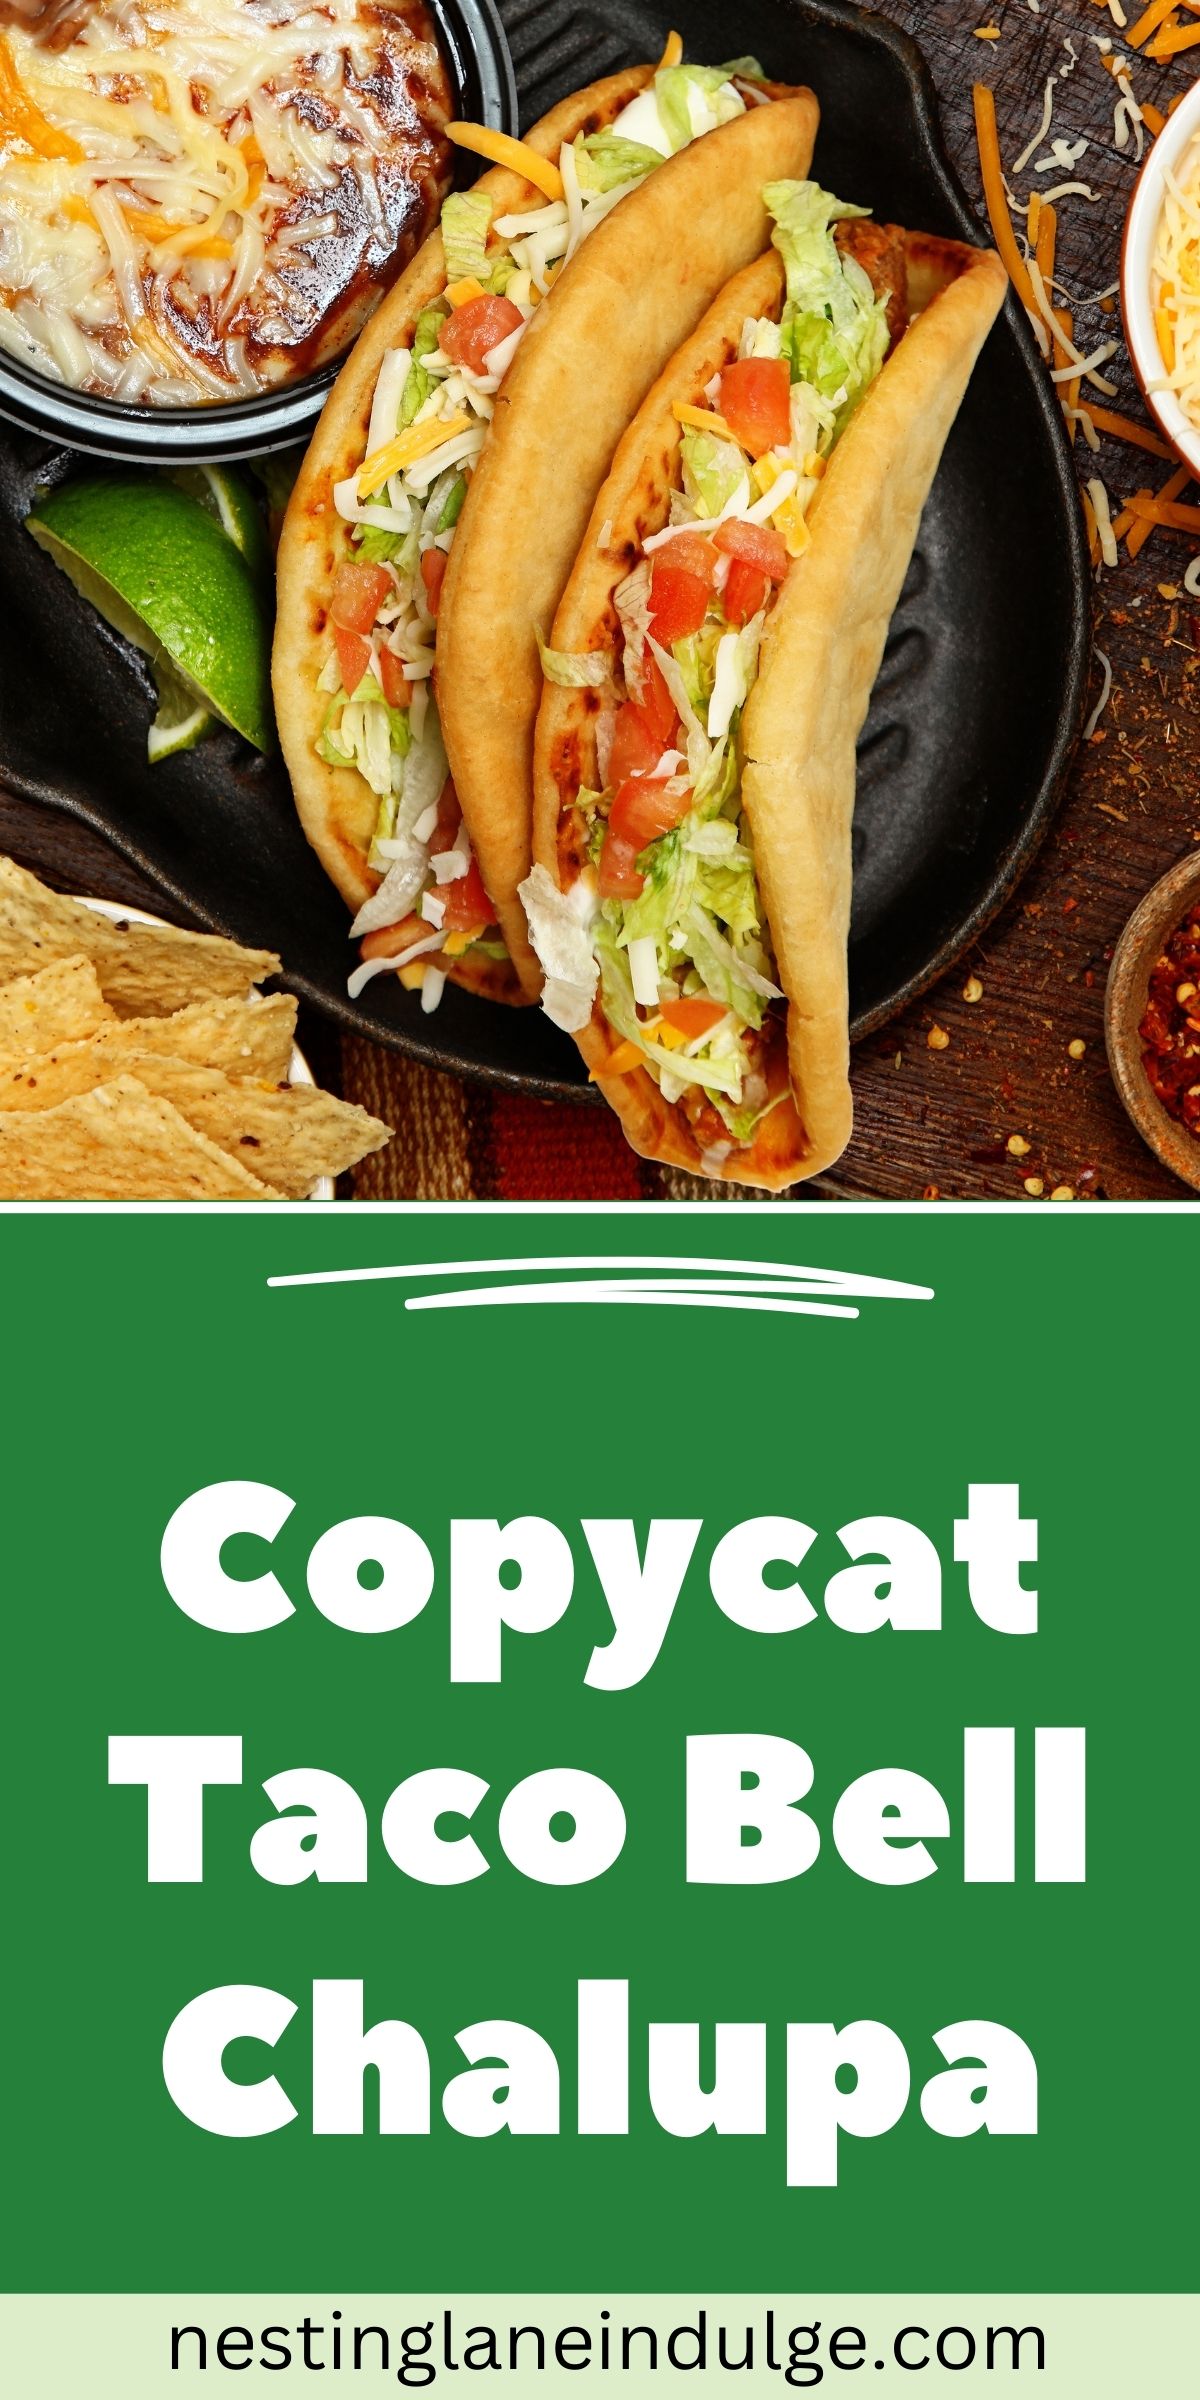 Graphic for Pinterest of copycat Taco Bell Chalupa recipe.